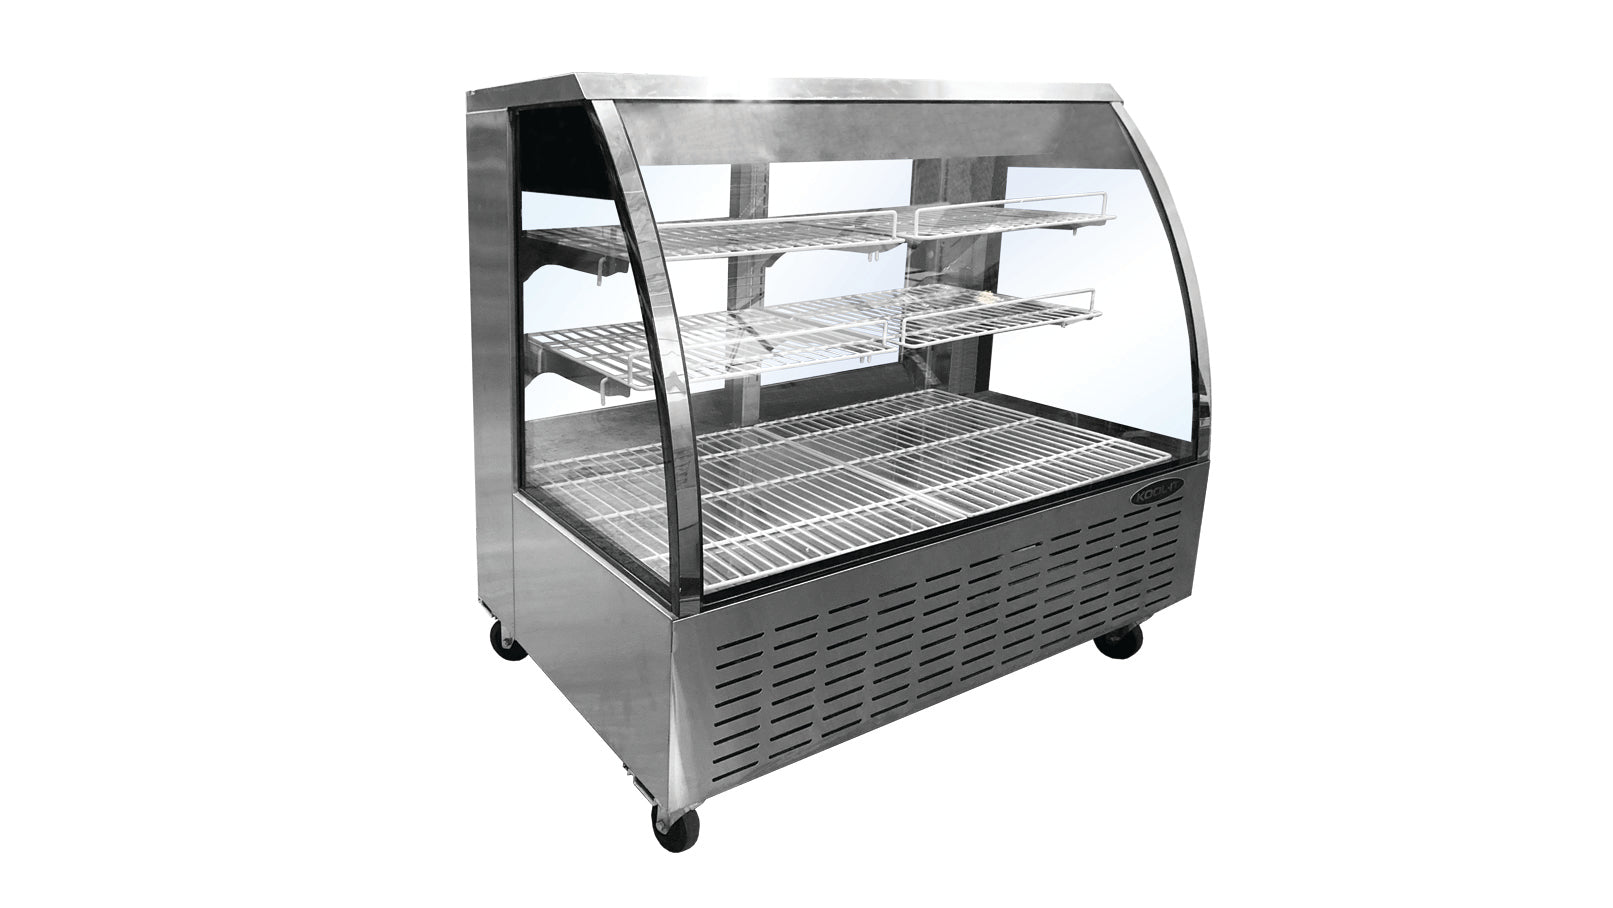 Kool-It - KDG-48, 48" Curved Glass Deli Cases With 18 cu.ft Capacity